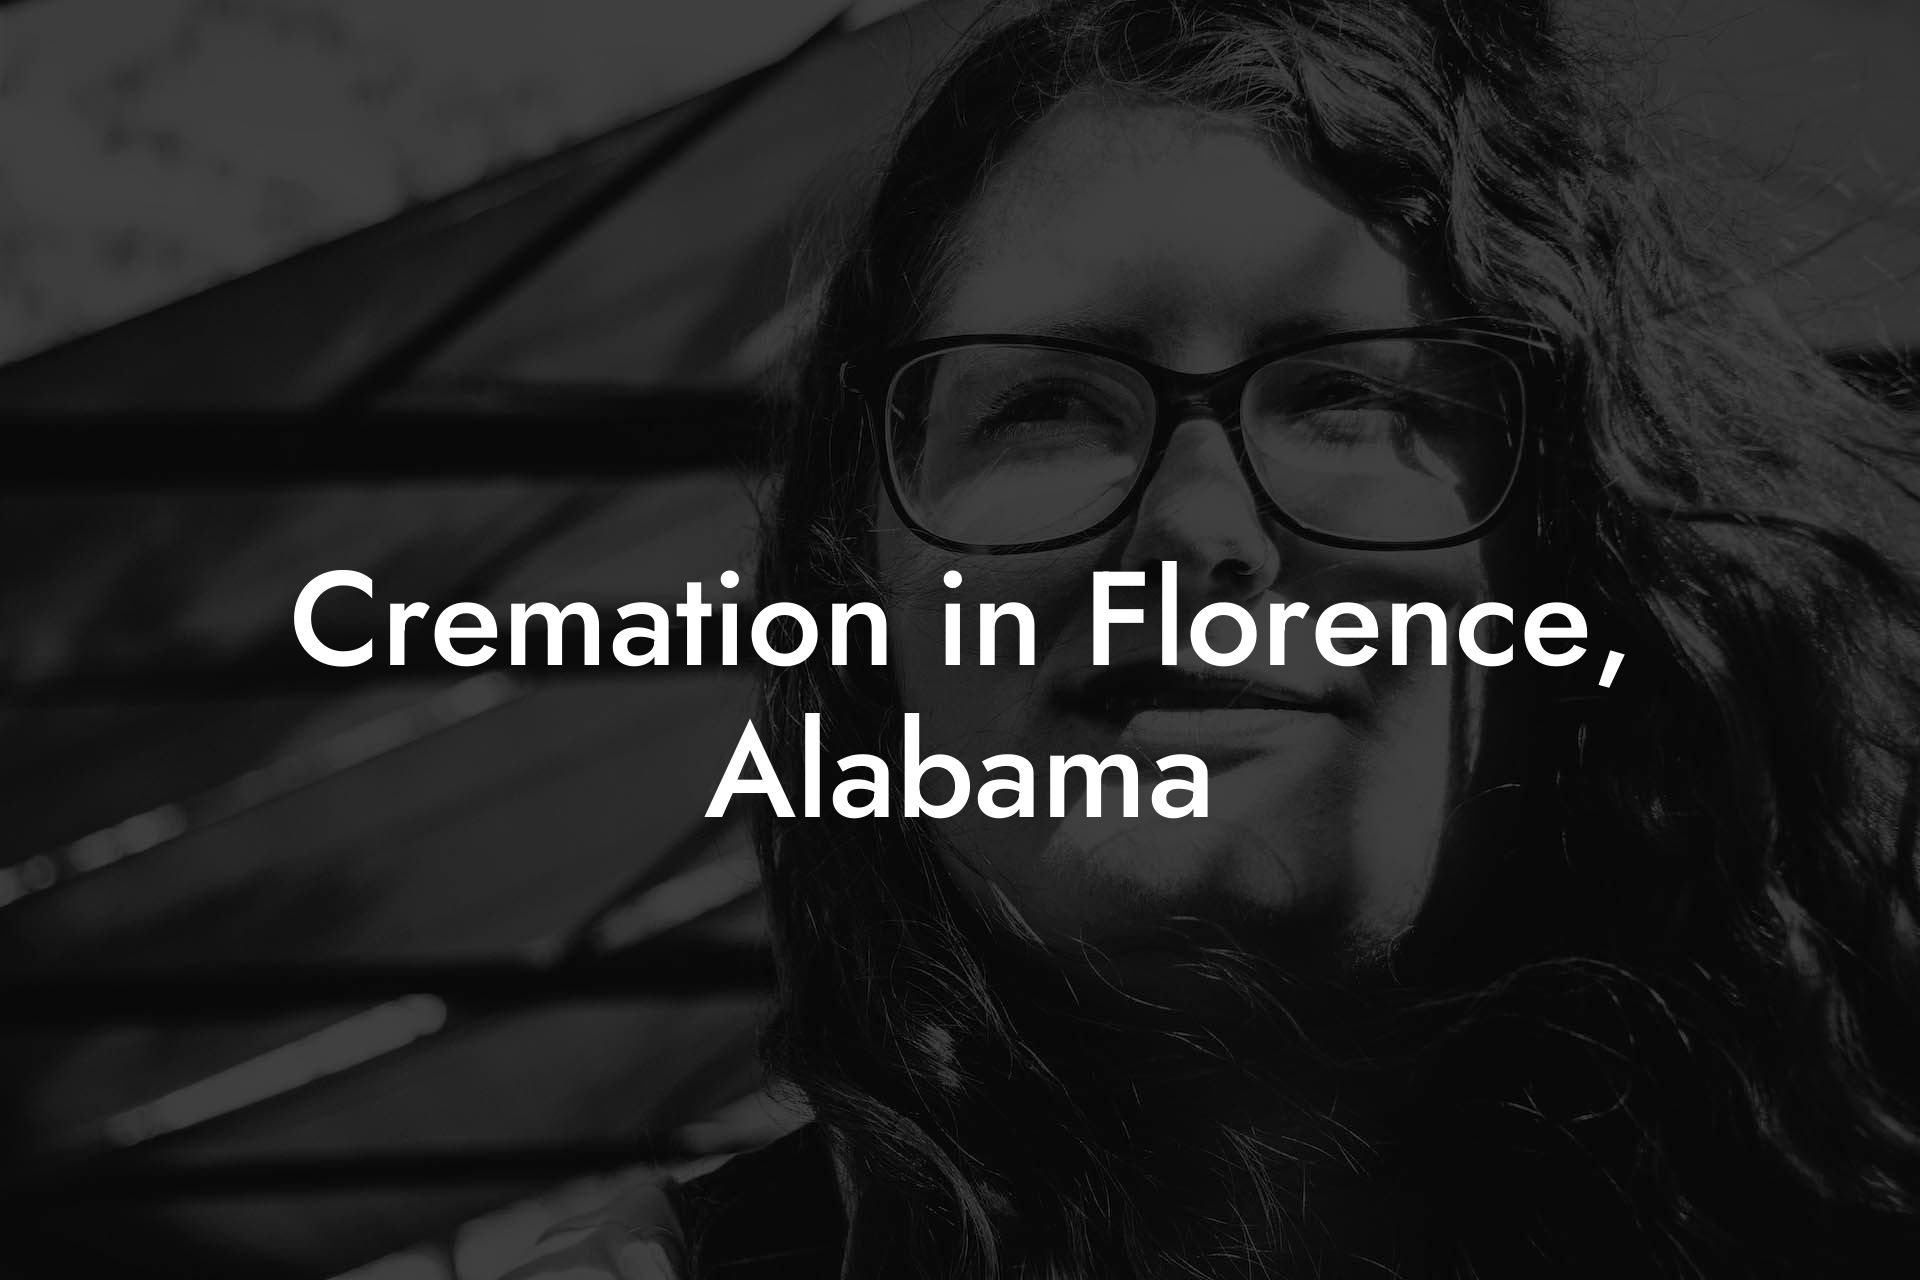 Cremation in Florence, Alabama